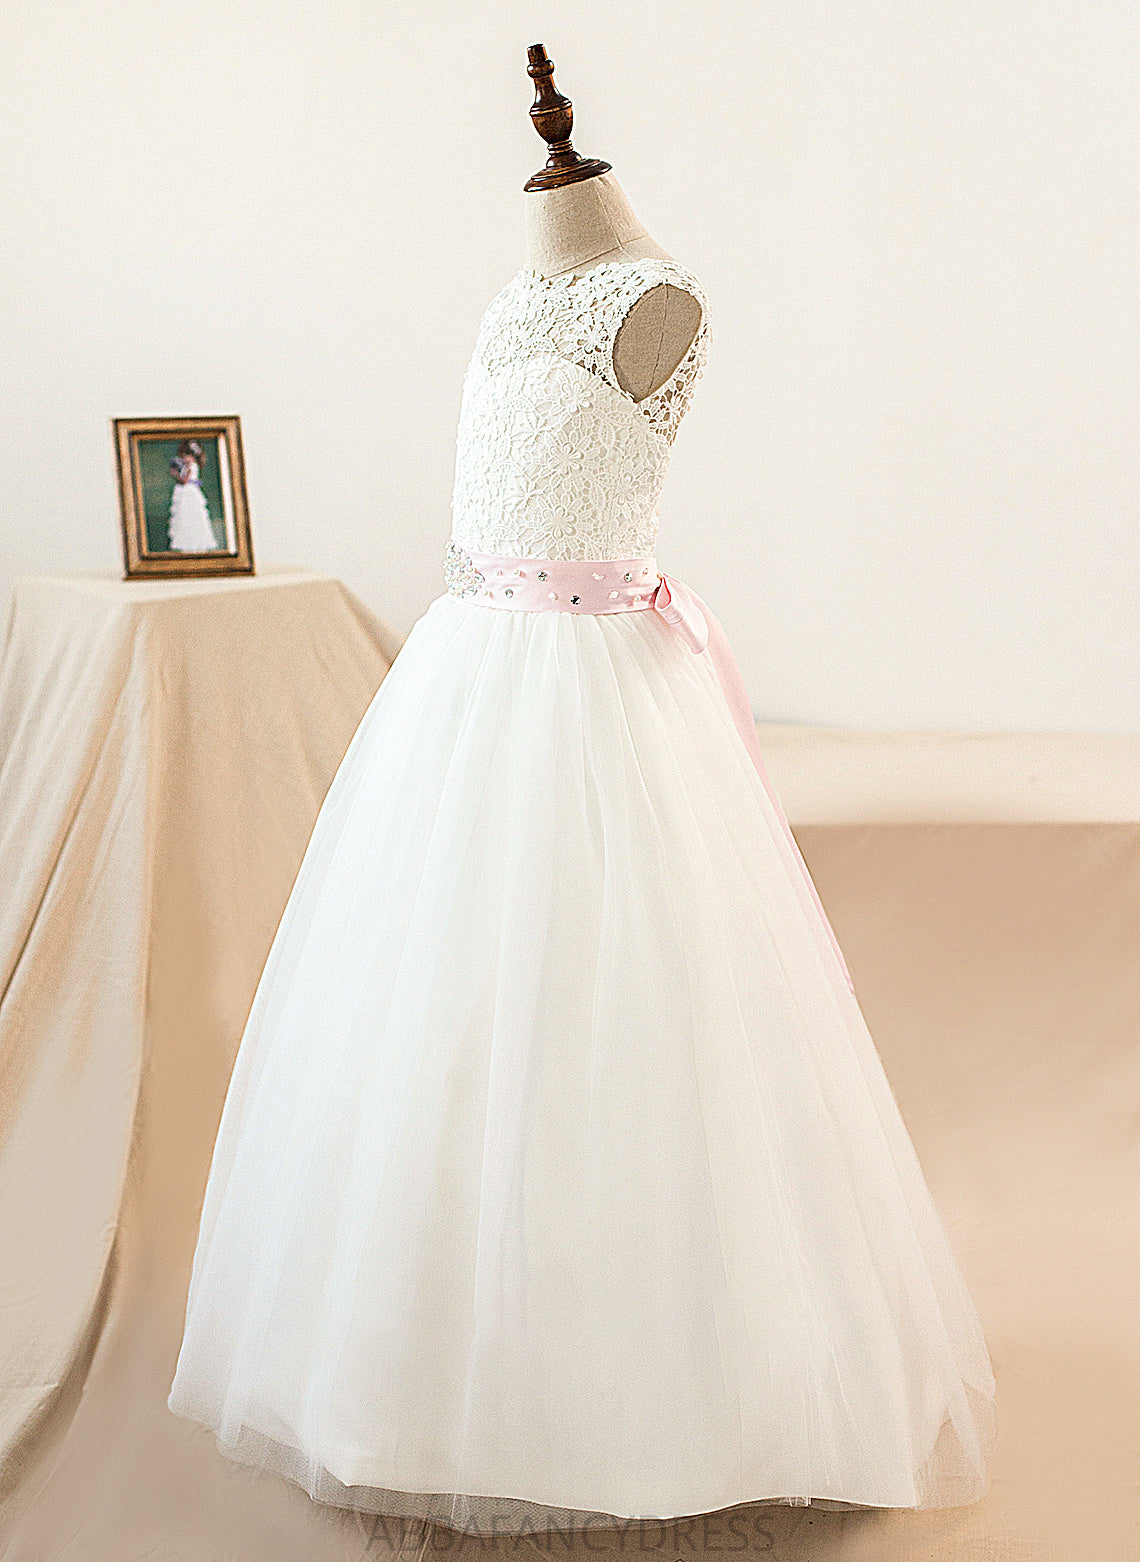 Junior Bridesmaid Dresses Scoop Ball-Gown/Princess Sash Beading Floor-Length Hillary With Tulle Bow(s) Neck